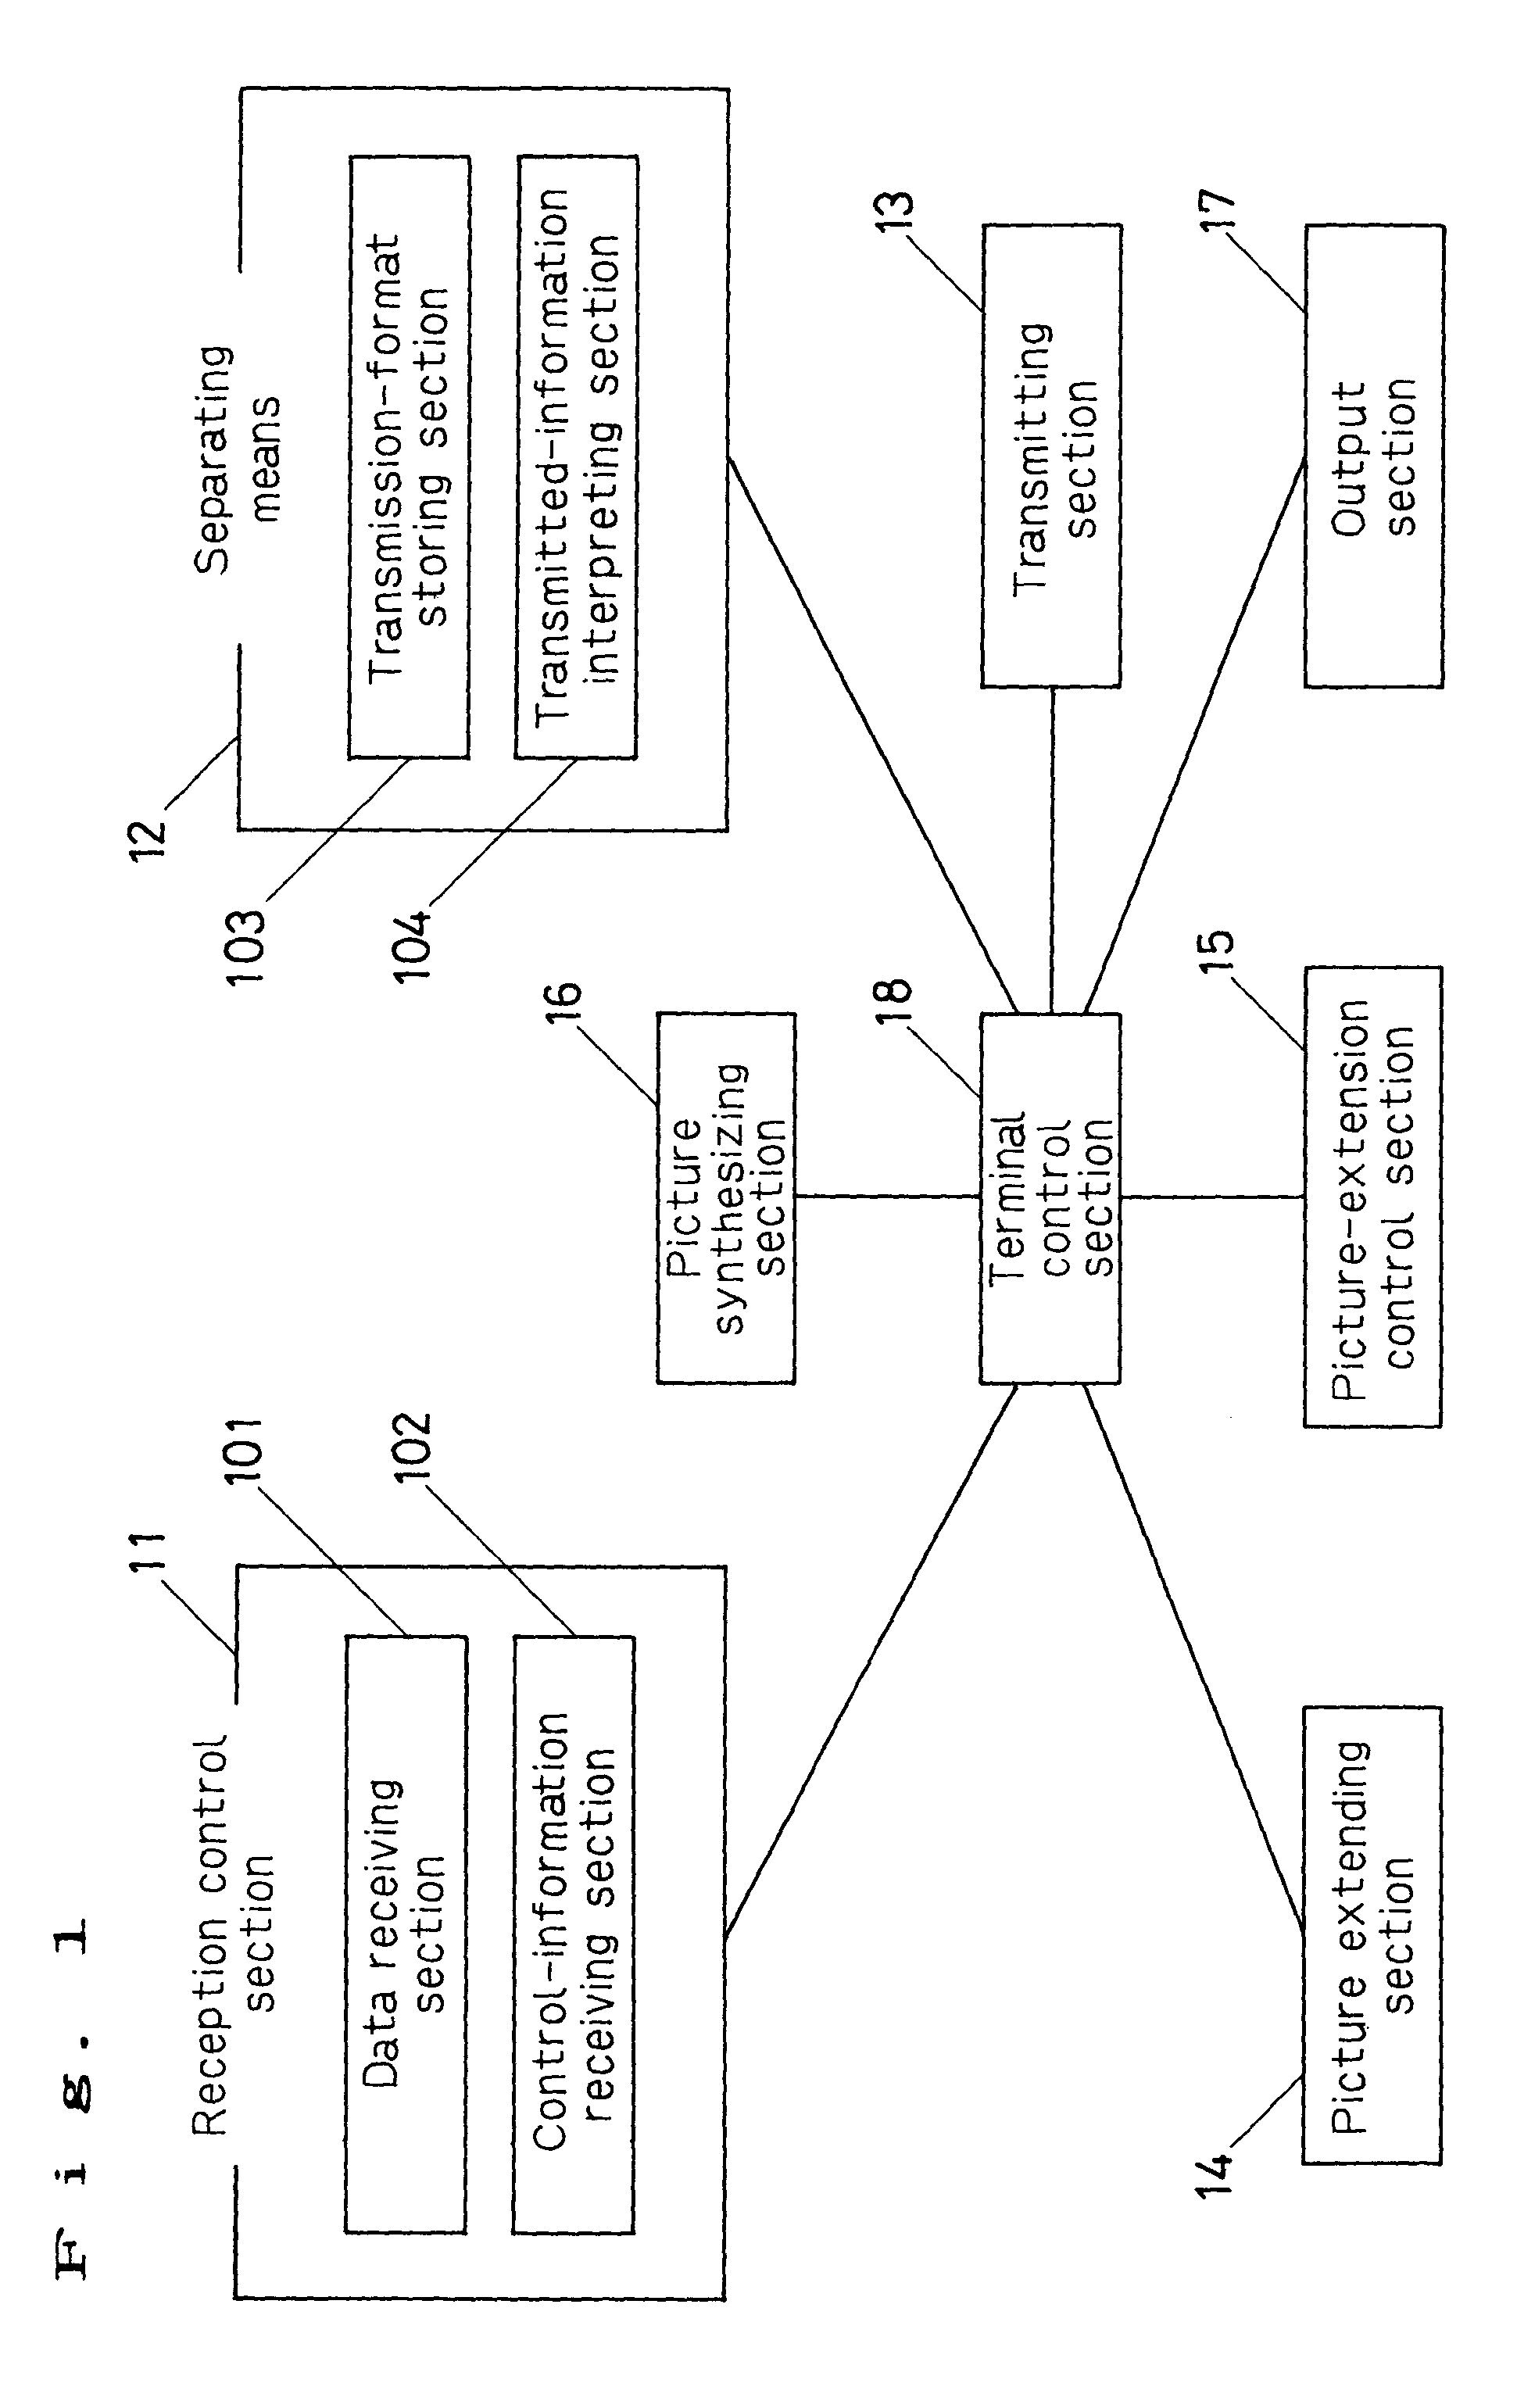 Method and apparatus for transmitting encoded information based upon priority data in the encoded information